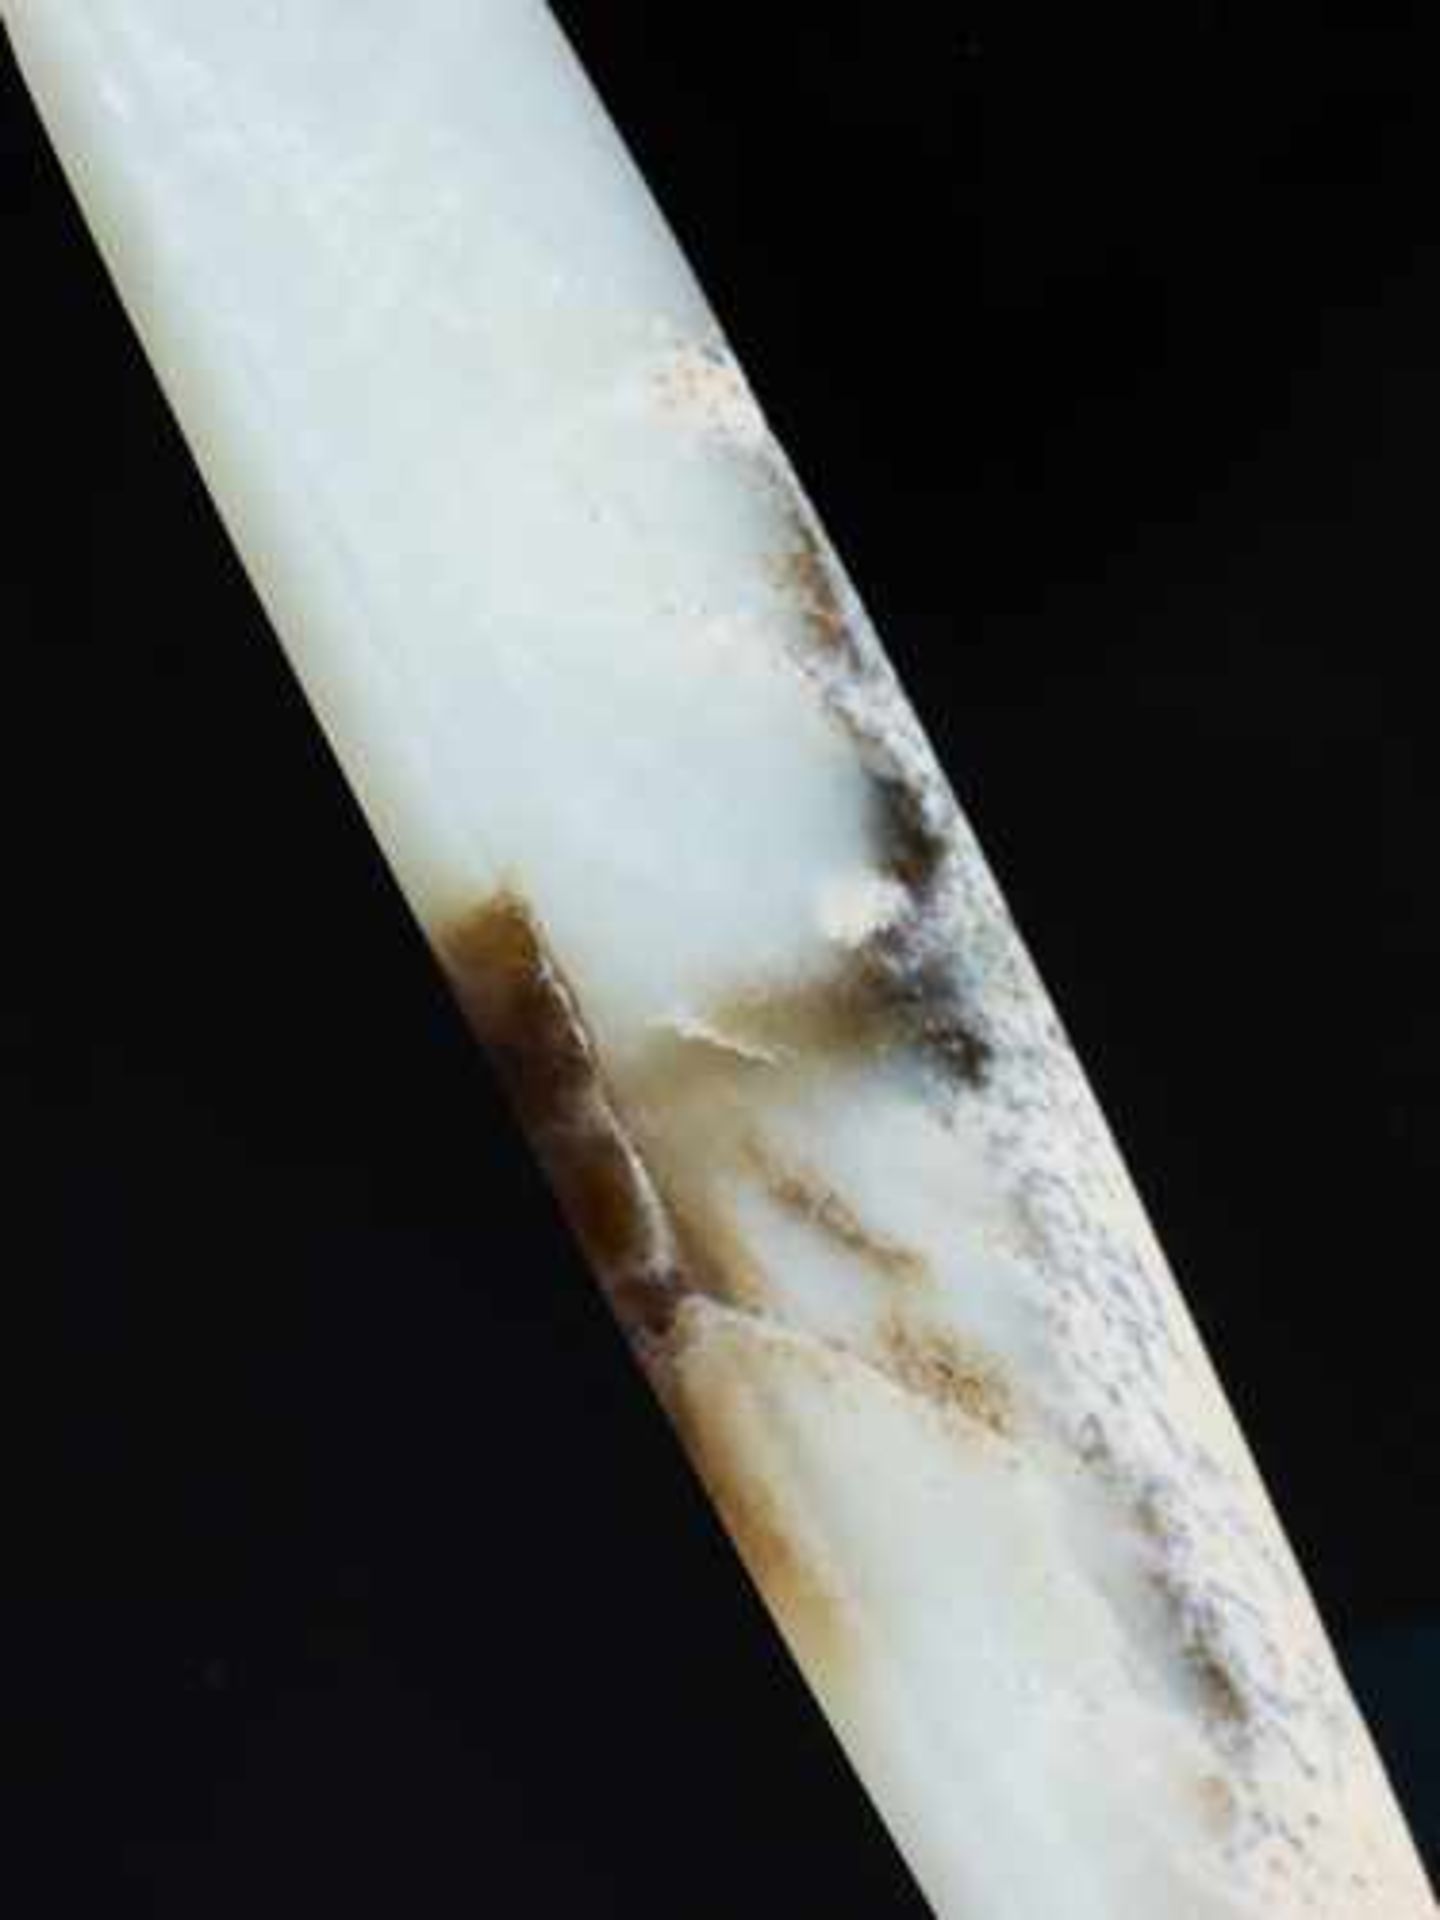 A STRIKING MARBLE-LIKE BEN BLADE IN WHITE JADE Jade, China. Early Bronze Age, Qijia Culture, c. - Image 5 of 7